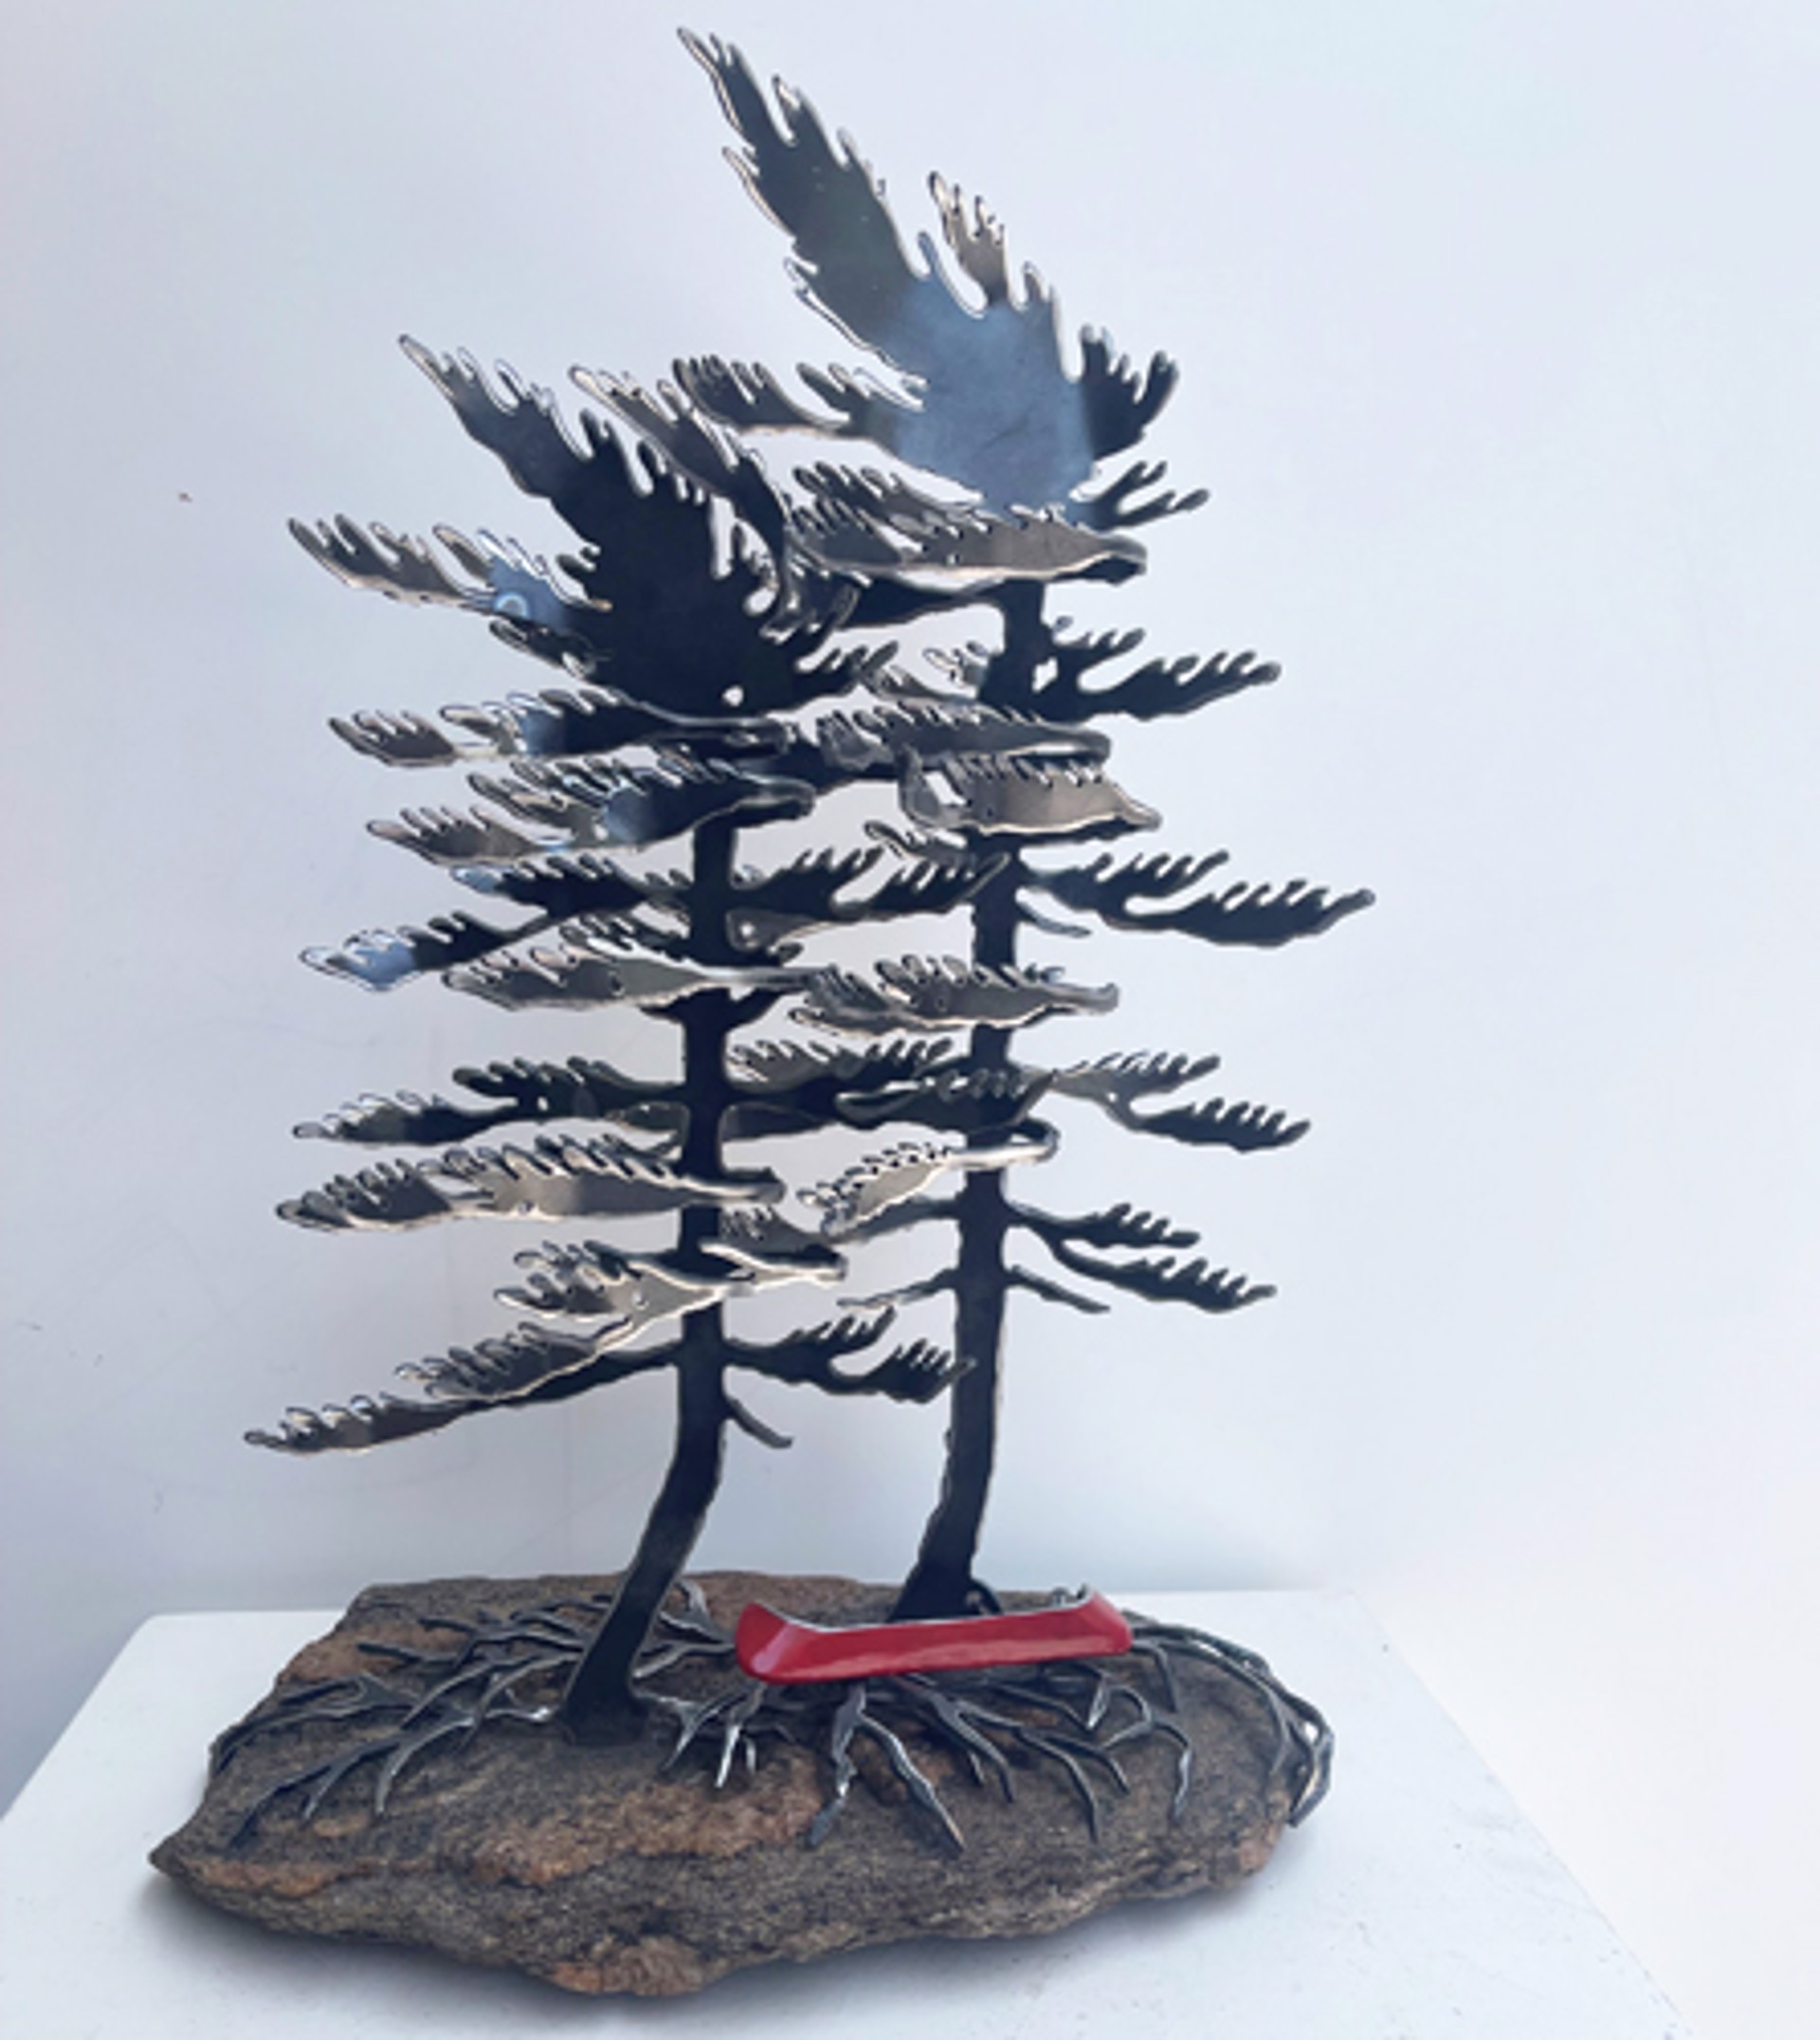 Two Pine, Canoe 659782 by Cathy Mark